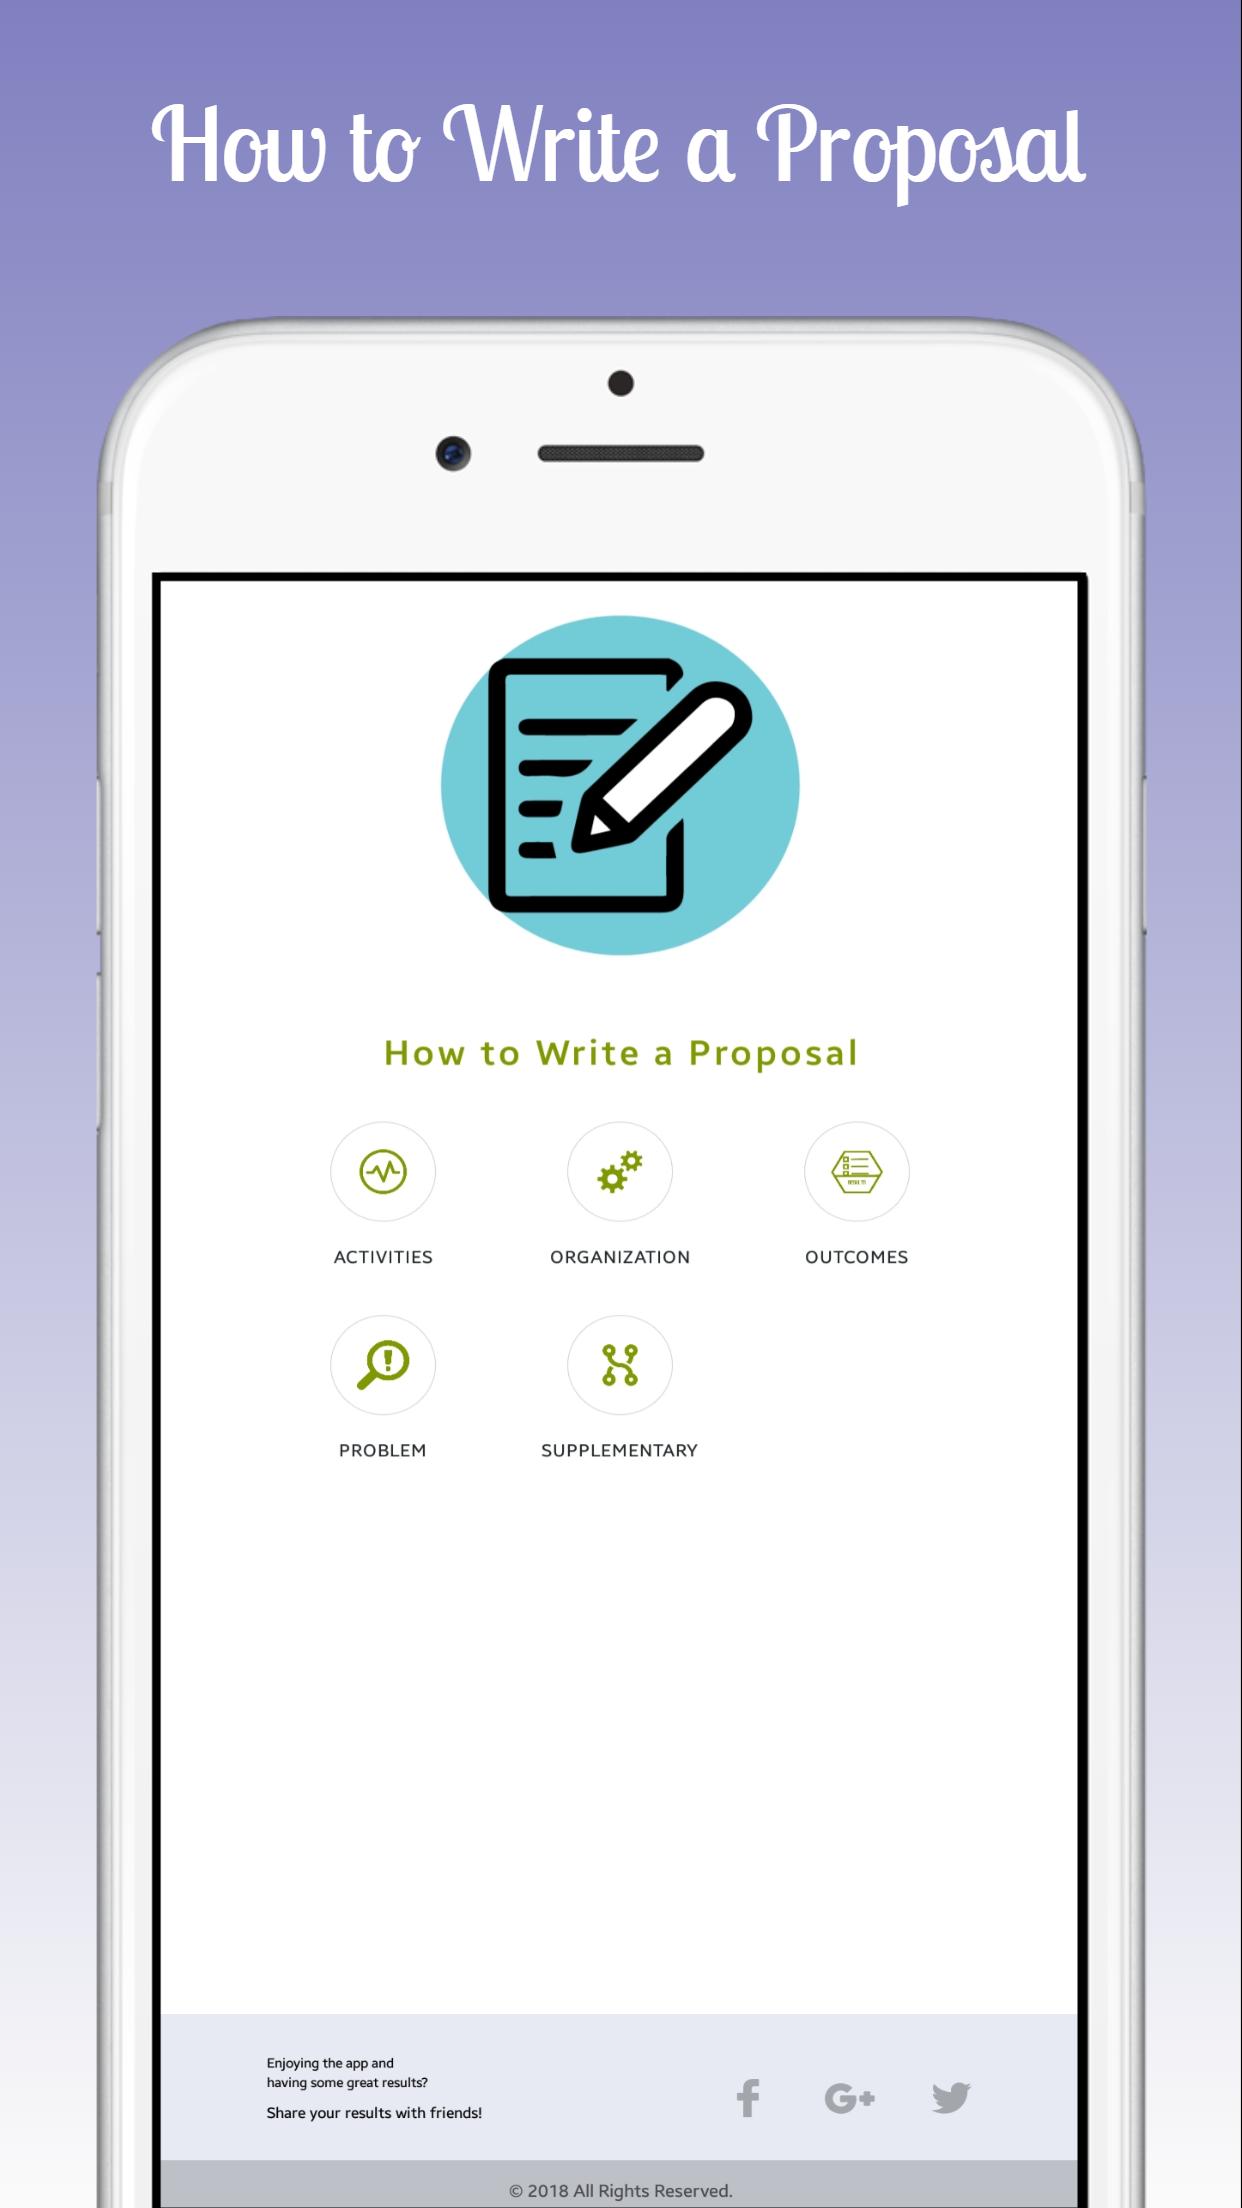 How To Write A Proposal for Android - APK Download